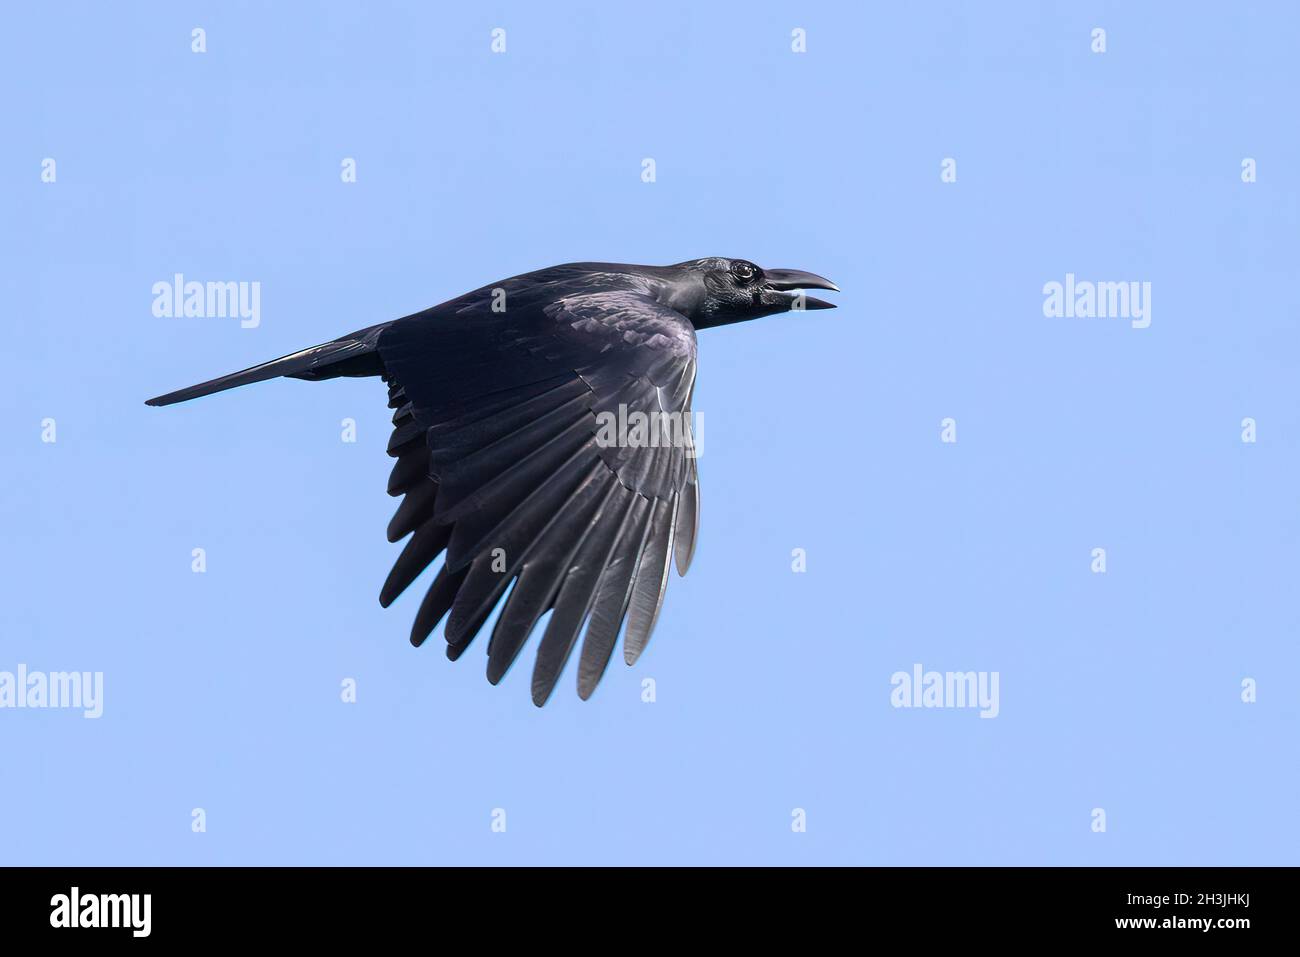 Image of a crow flapping its wings against a blue clear sky. Birds. Wild Animals. Stock Photo